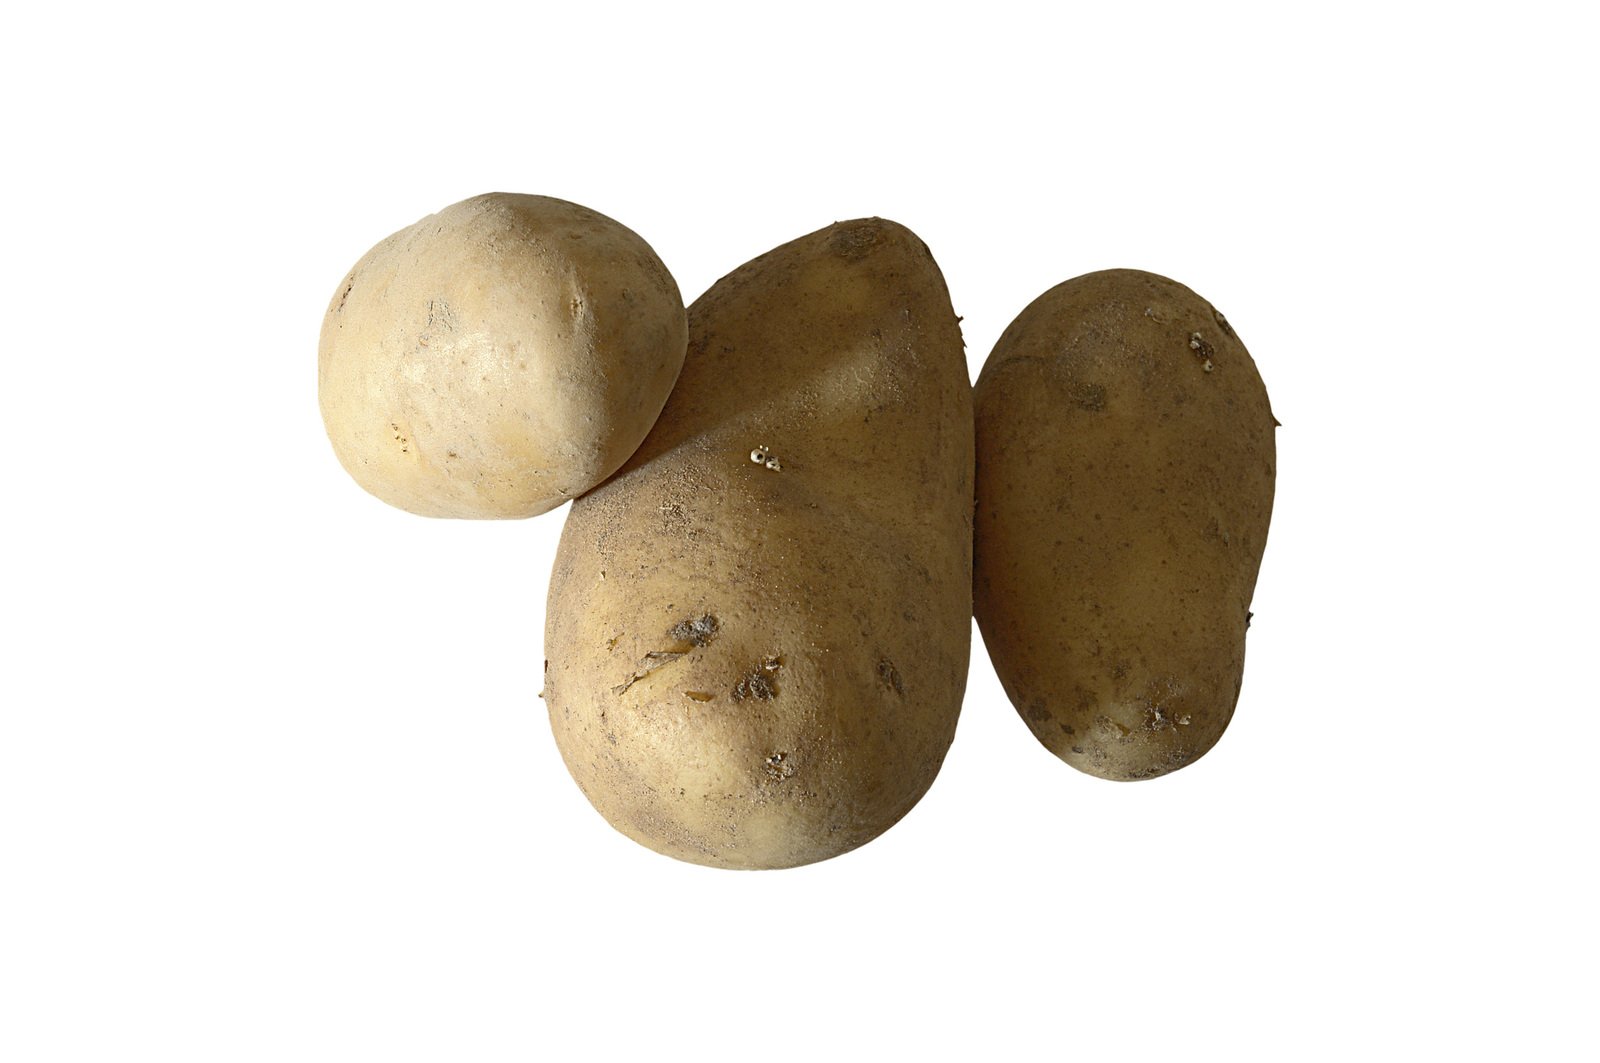 three potatoes on white background in perspective